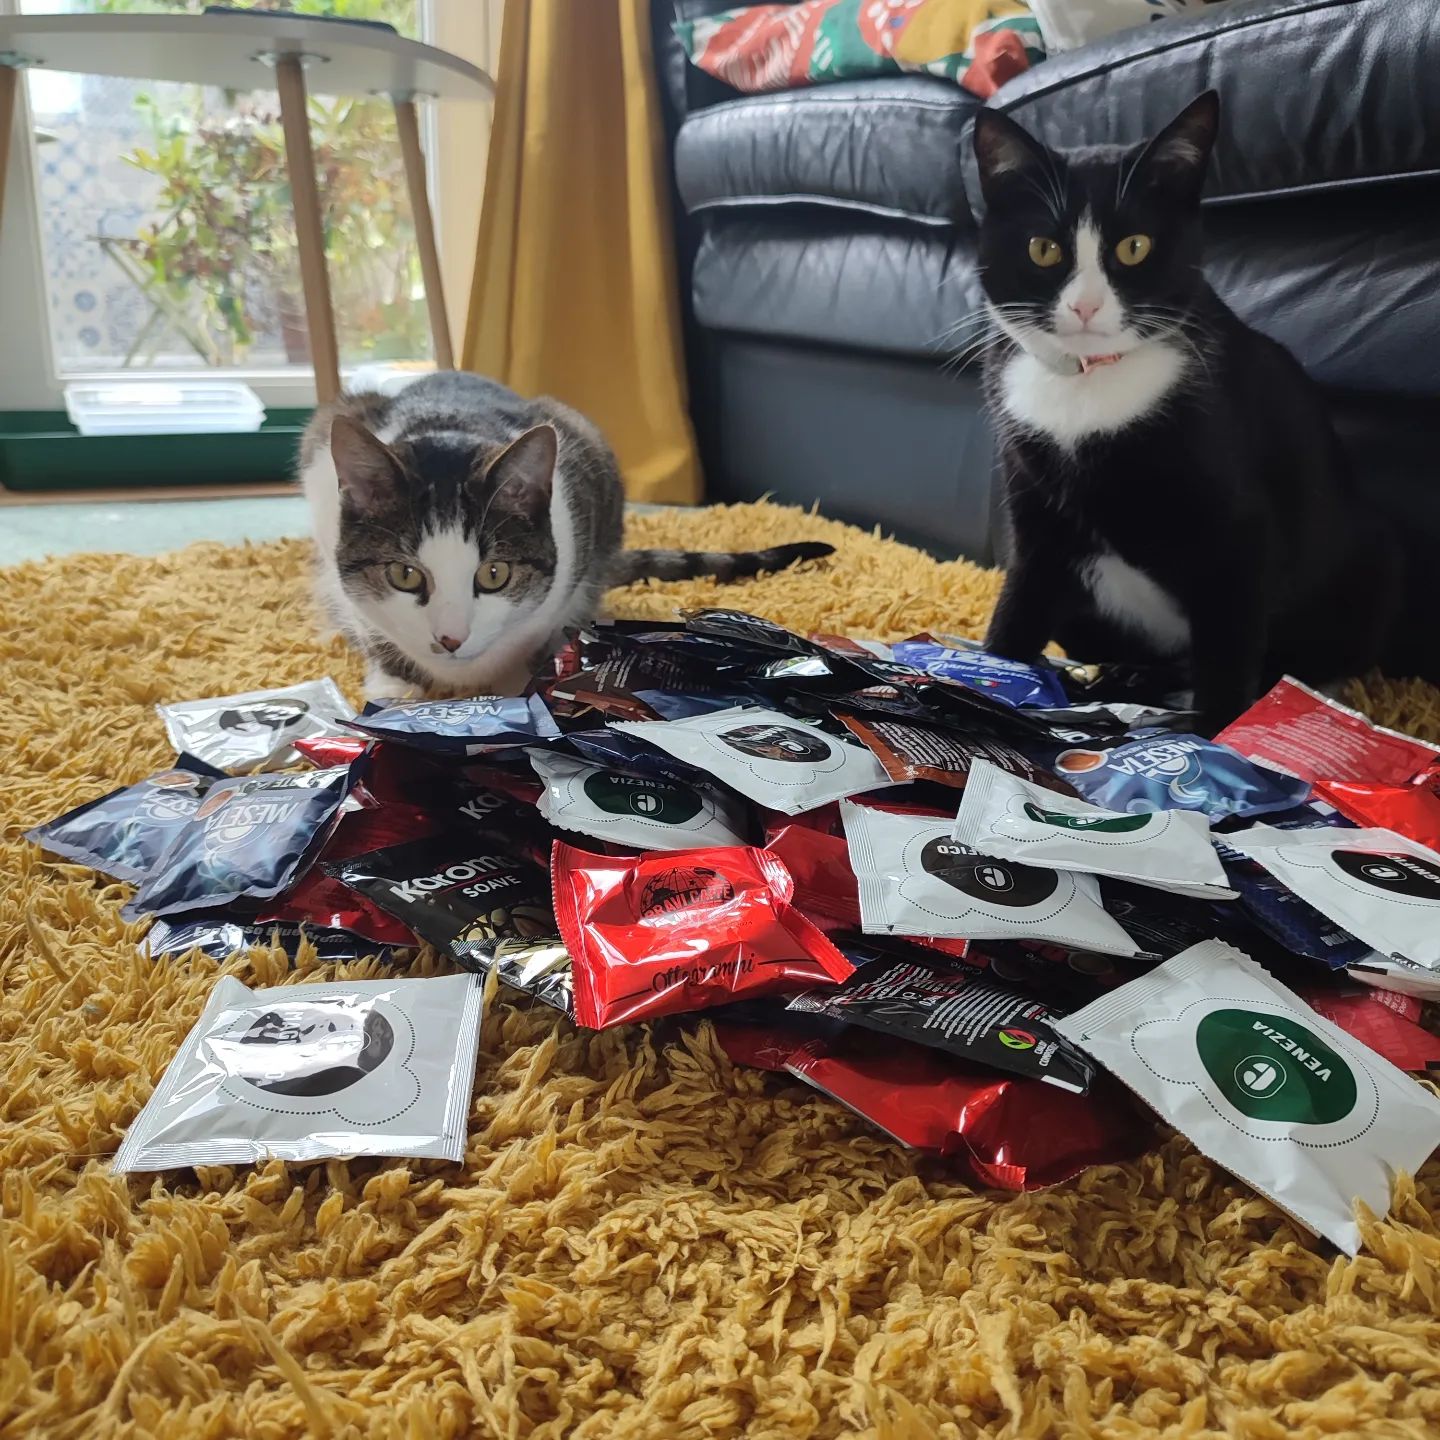 Three months supply of delicious Italian coffee pods and two curious cats...#catsofinstagram #catstagram #catsandcoffee